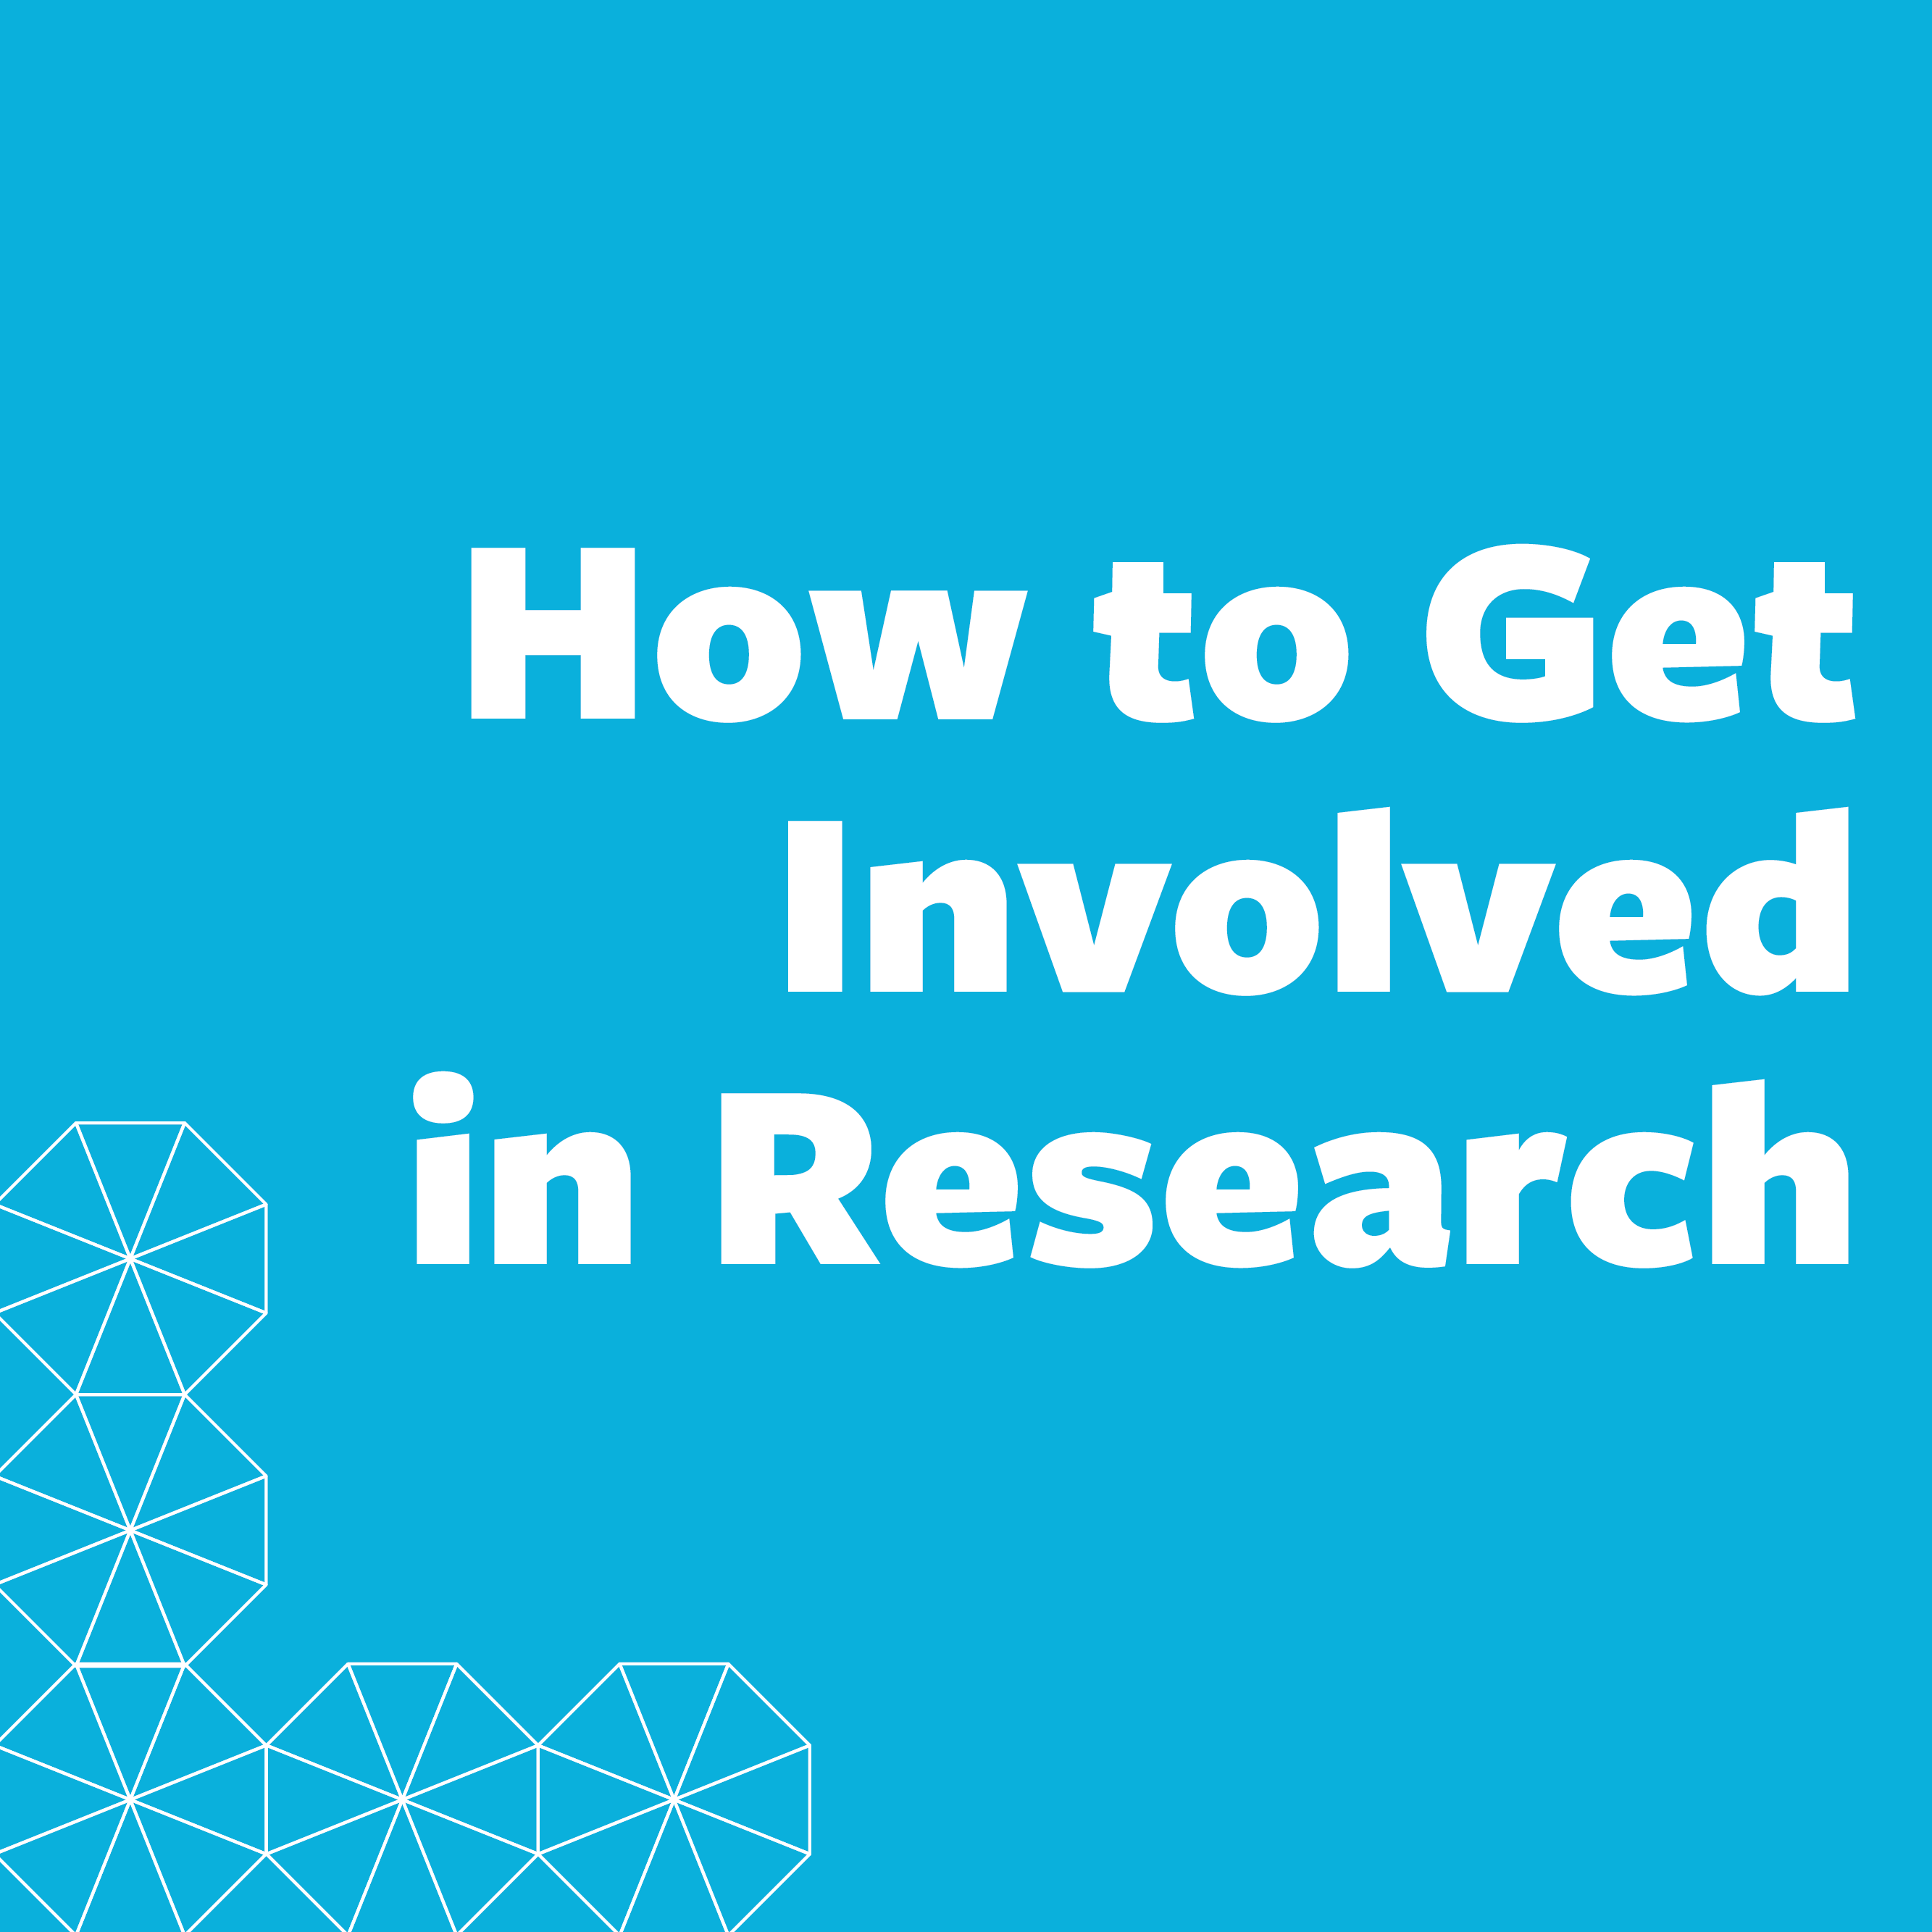 How to Get Involved in Research